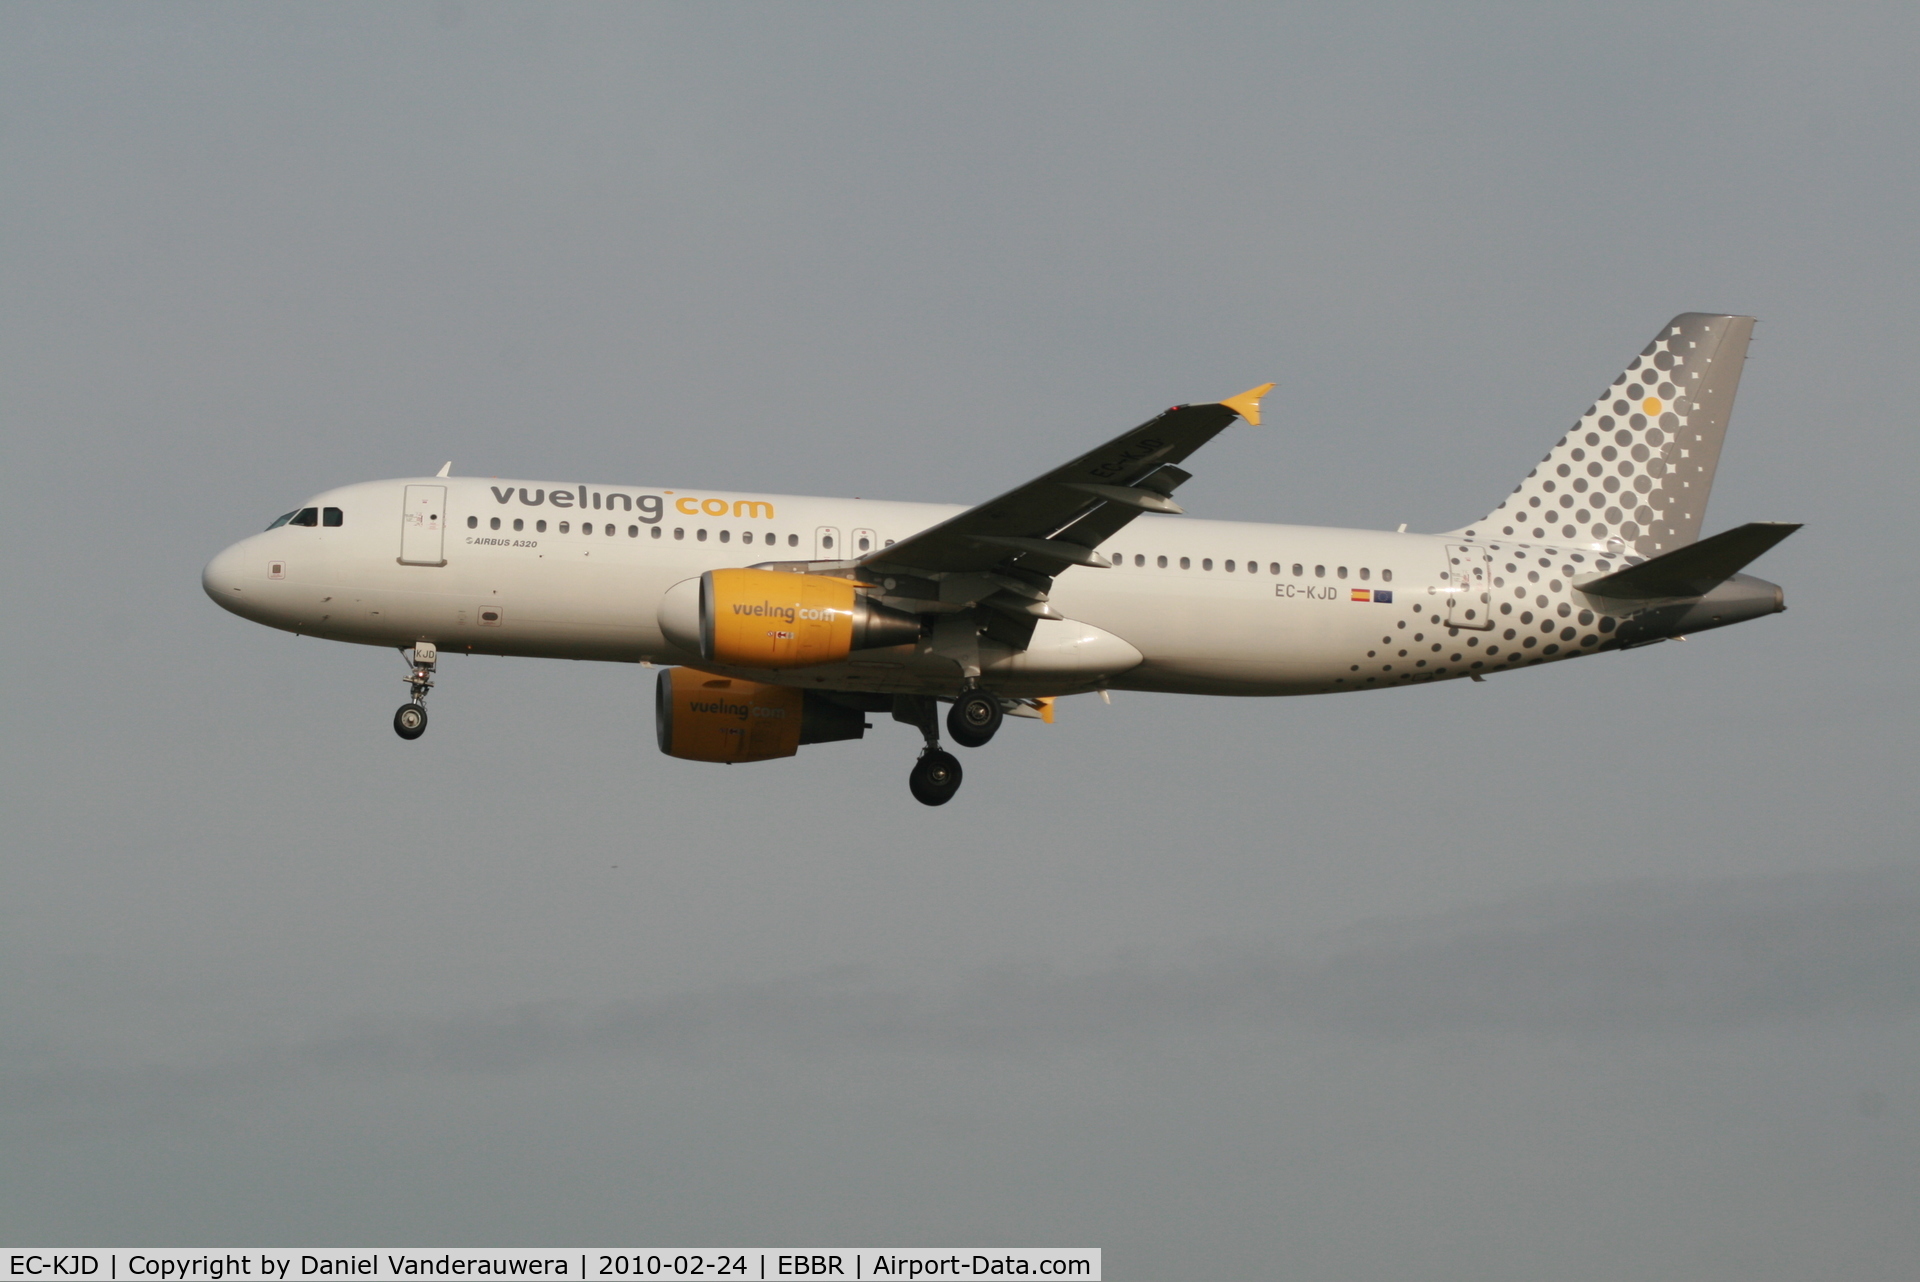 EC-KJD, 2007 Airbus A320-216 C/N 3237, Arrival of flight VY8988 to RWY 25L